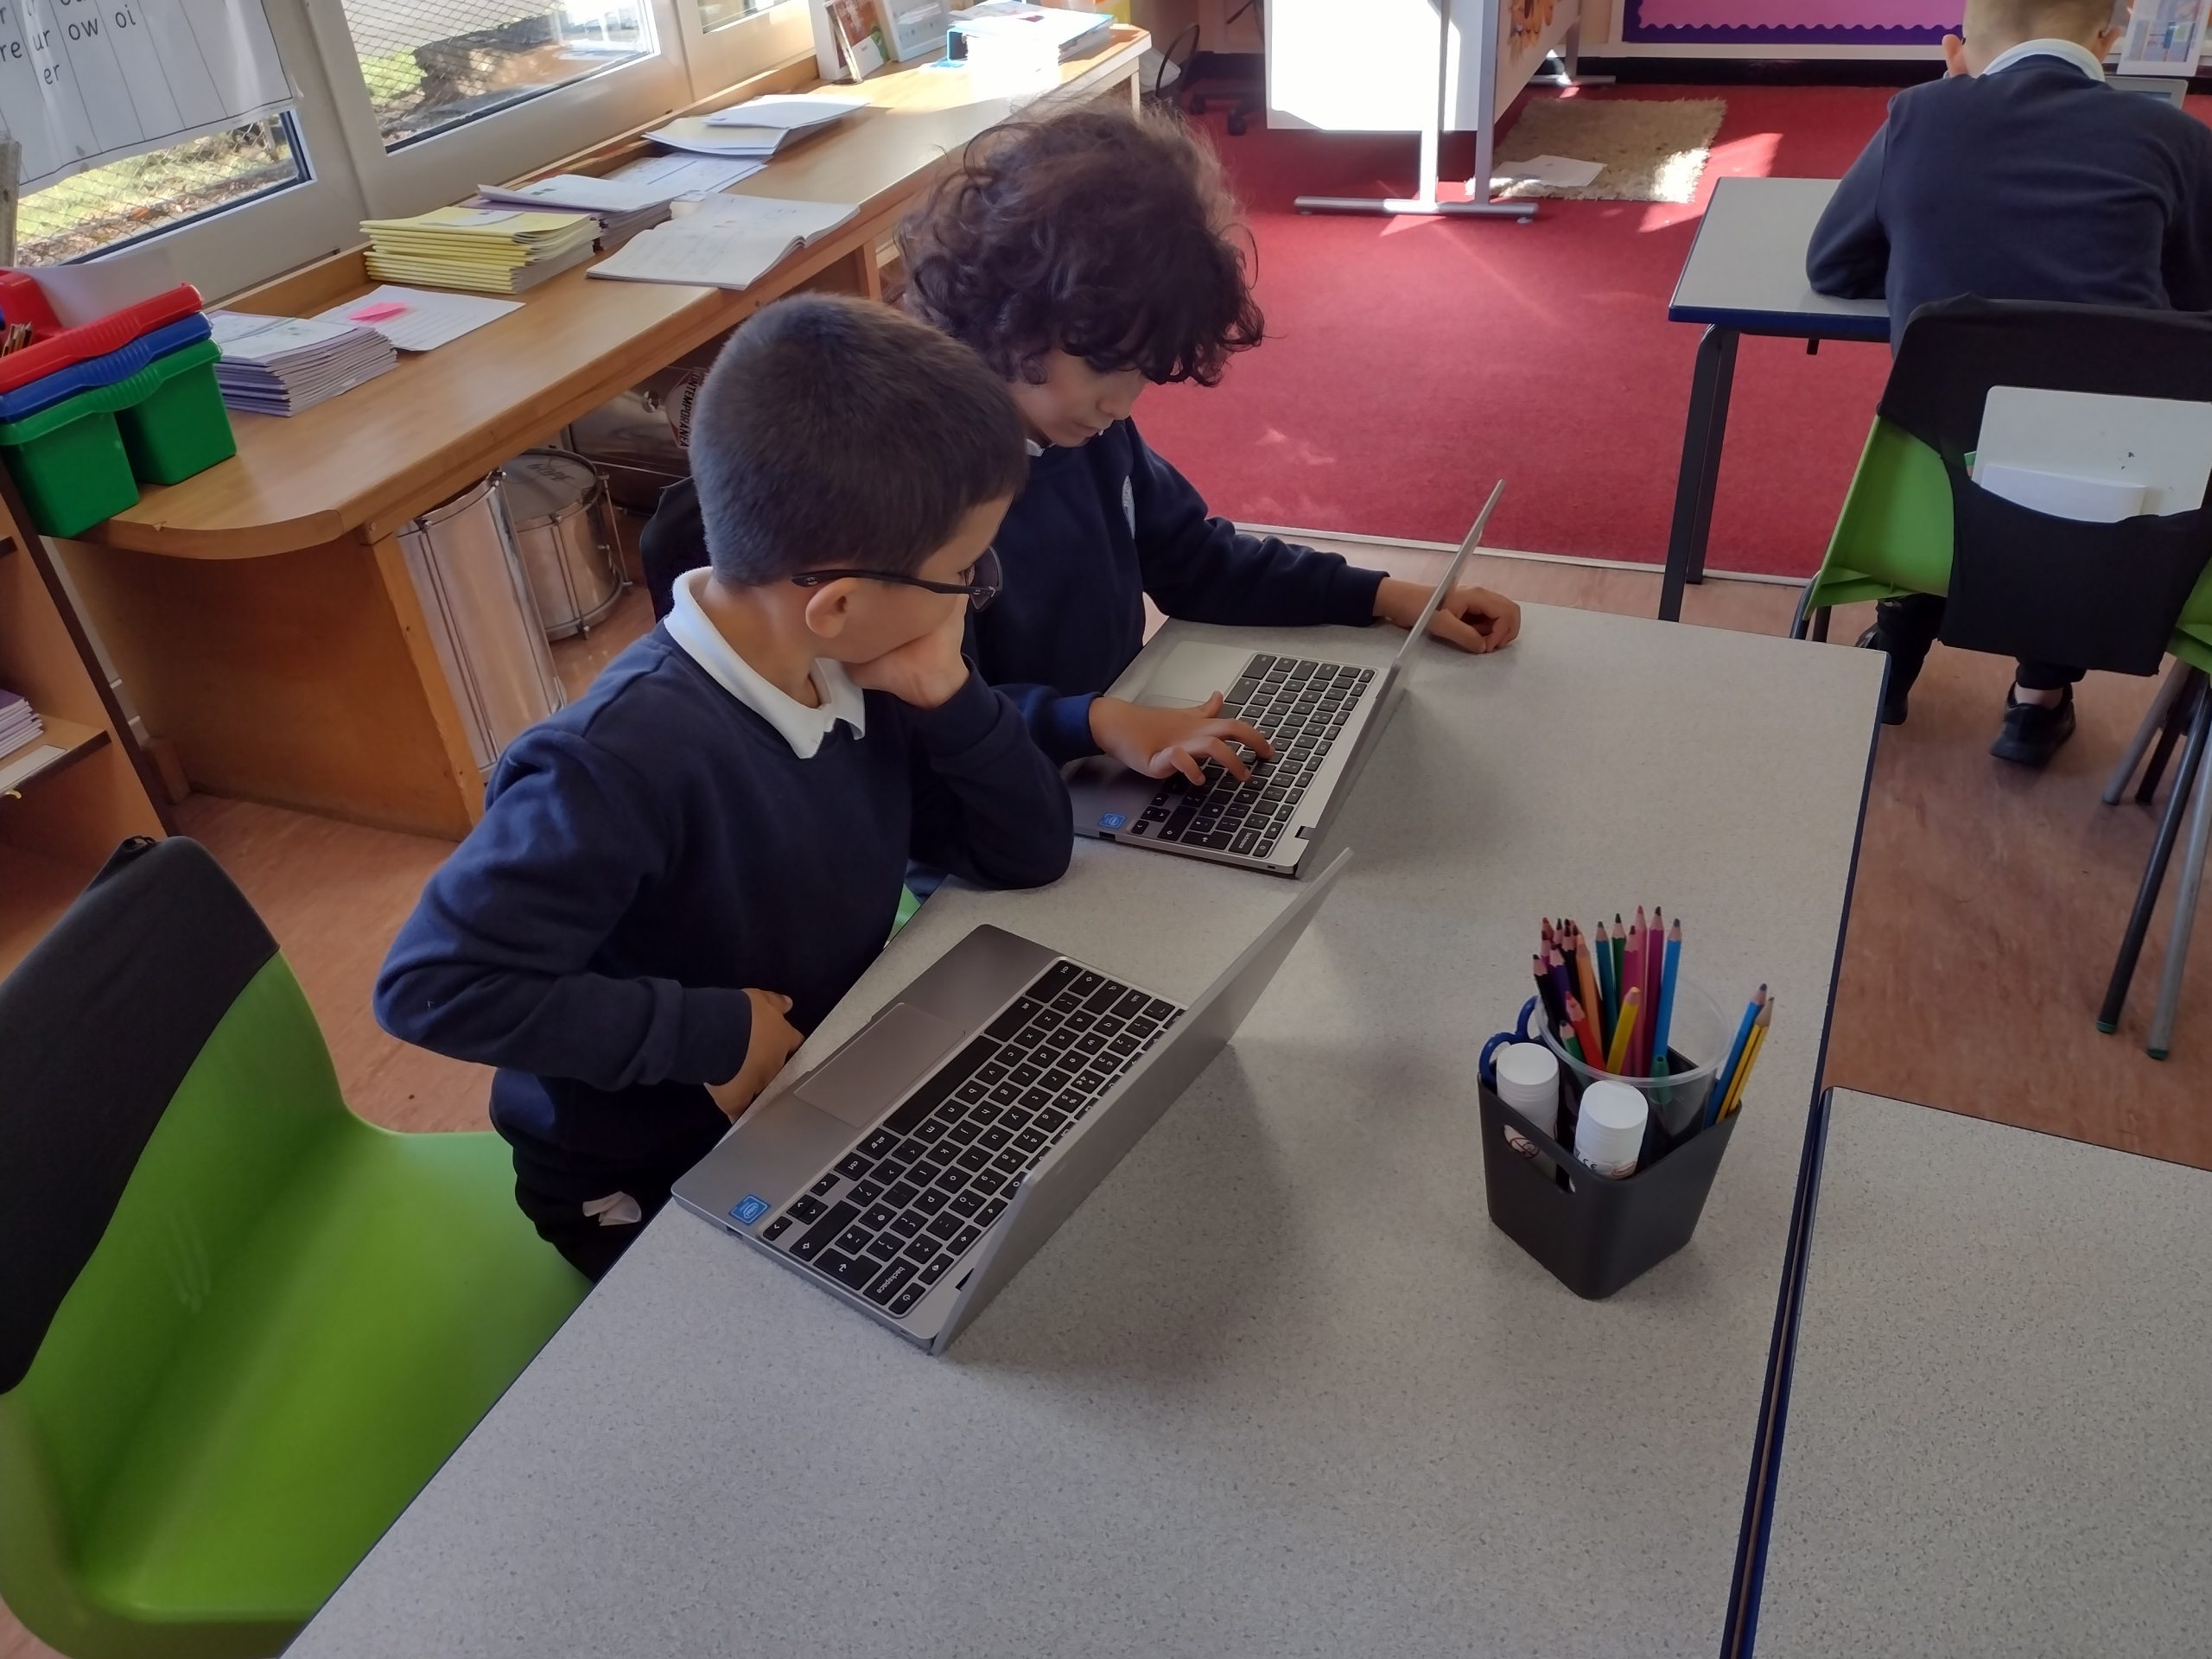 Year 3 children researching about Pixar and Dreamworks